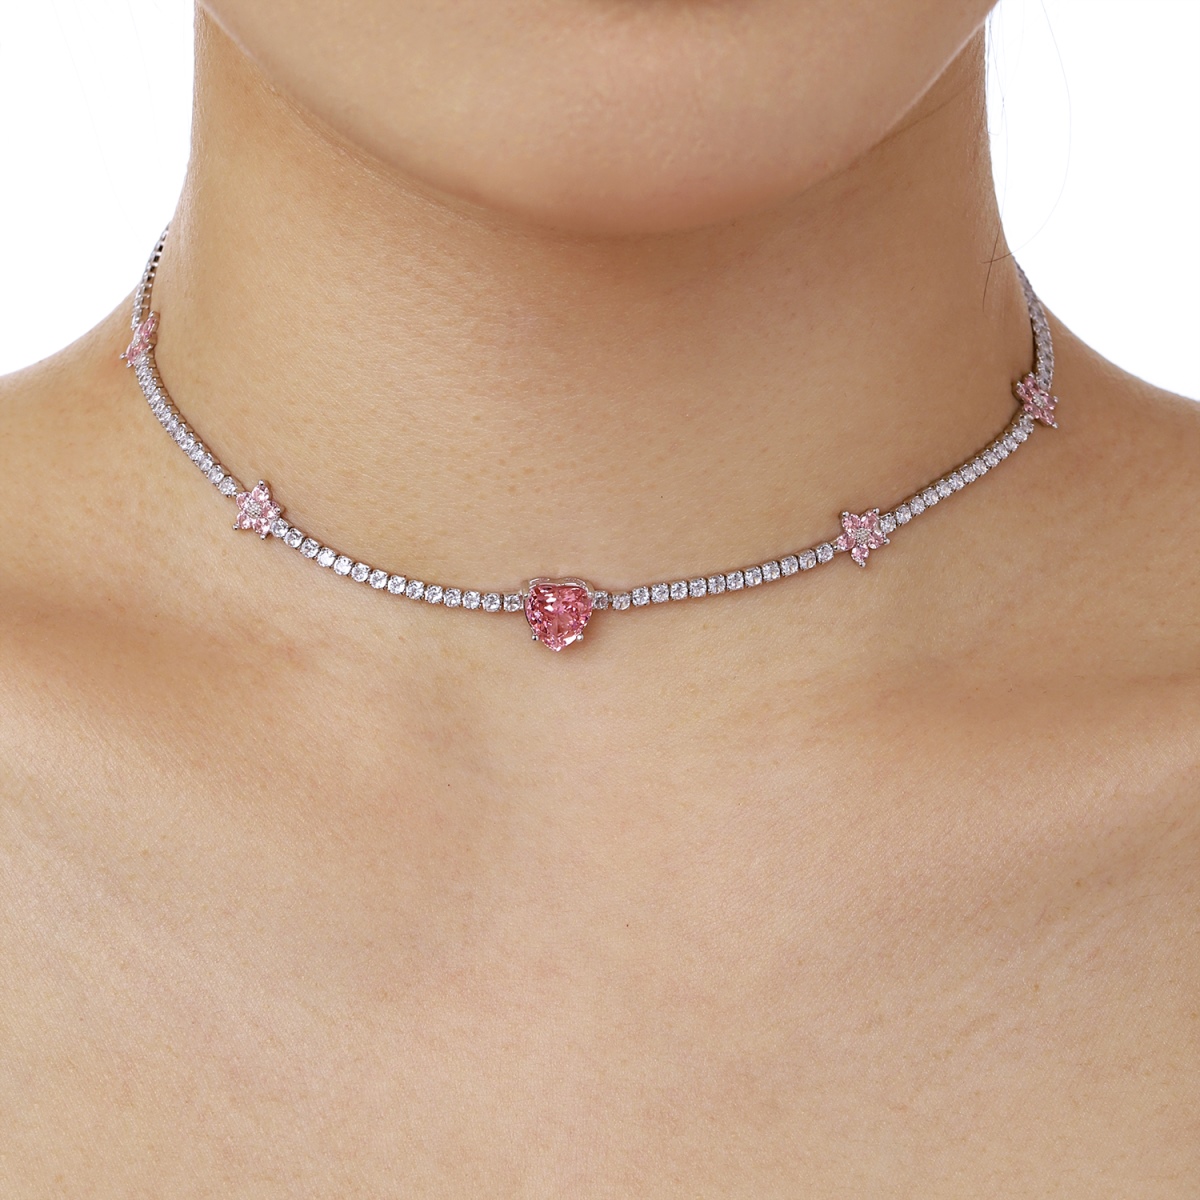 Pink Sweet Heart Floret Sterling Silver Tennis Necklace